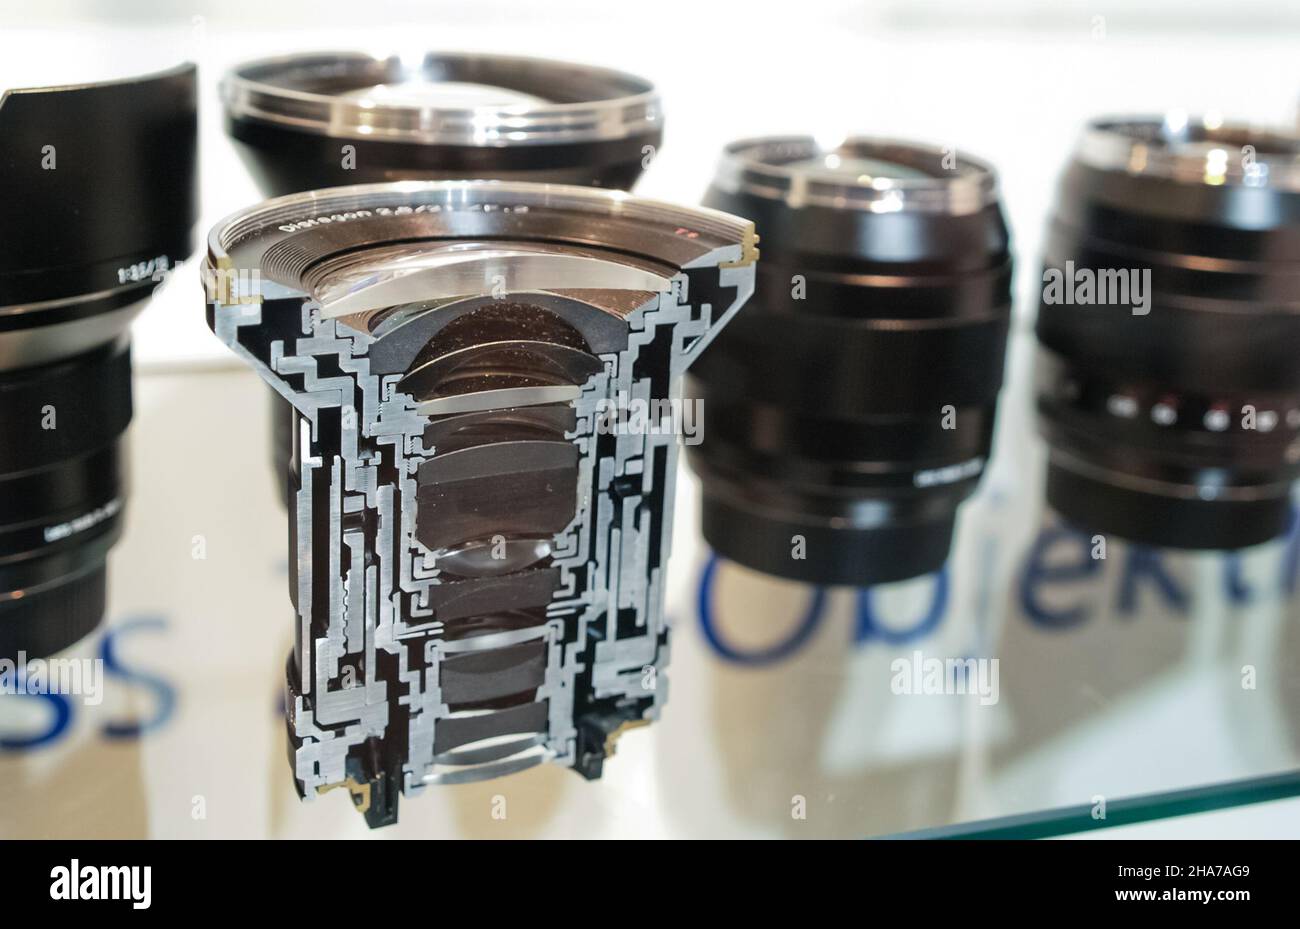 Cologne, Germany, September 2010. Cross-section of Carl Zeiss lens on display at the Photokina trade fair for the photographic and imaging industry Stock Photo